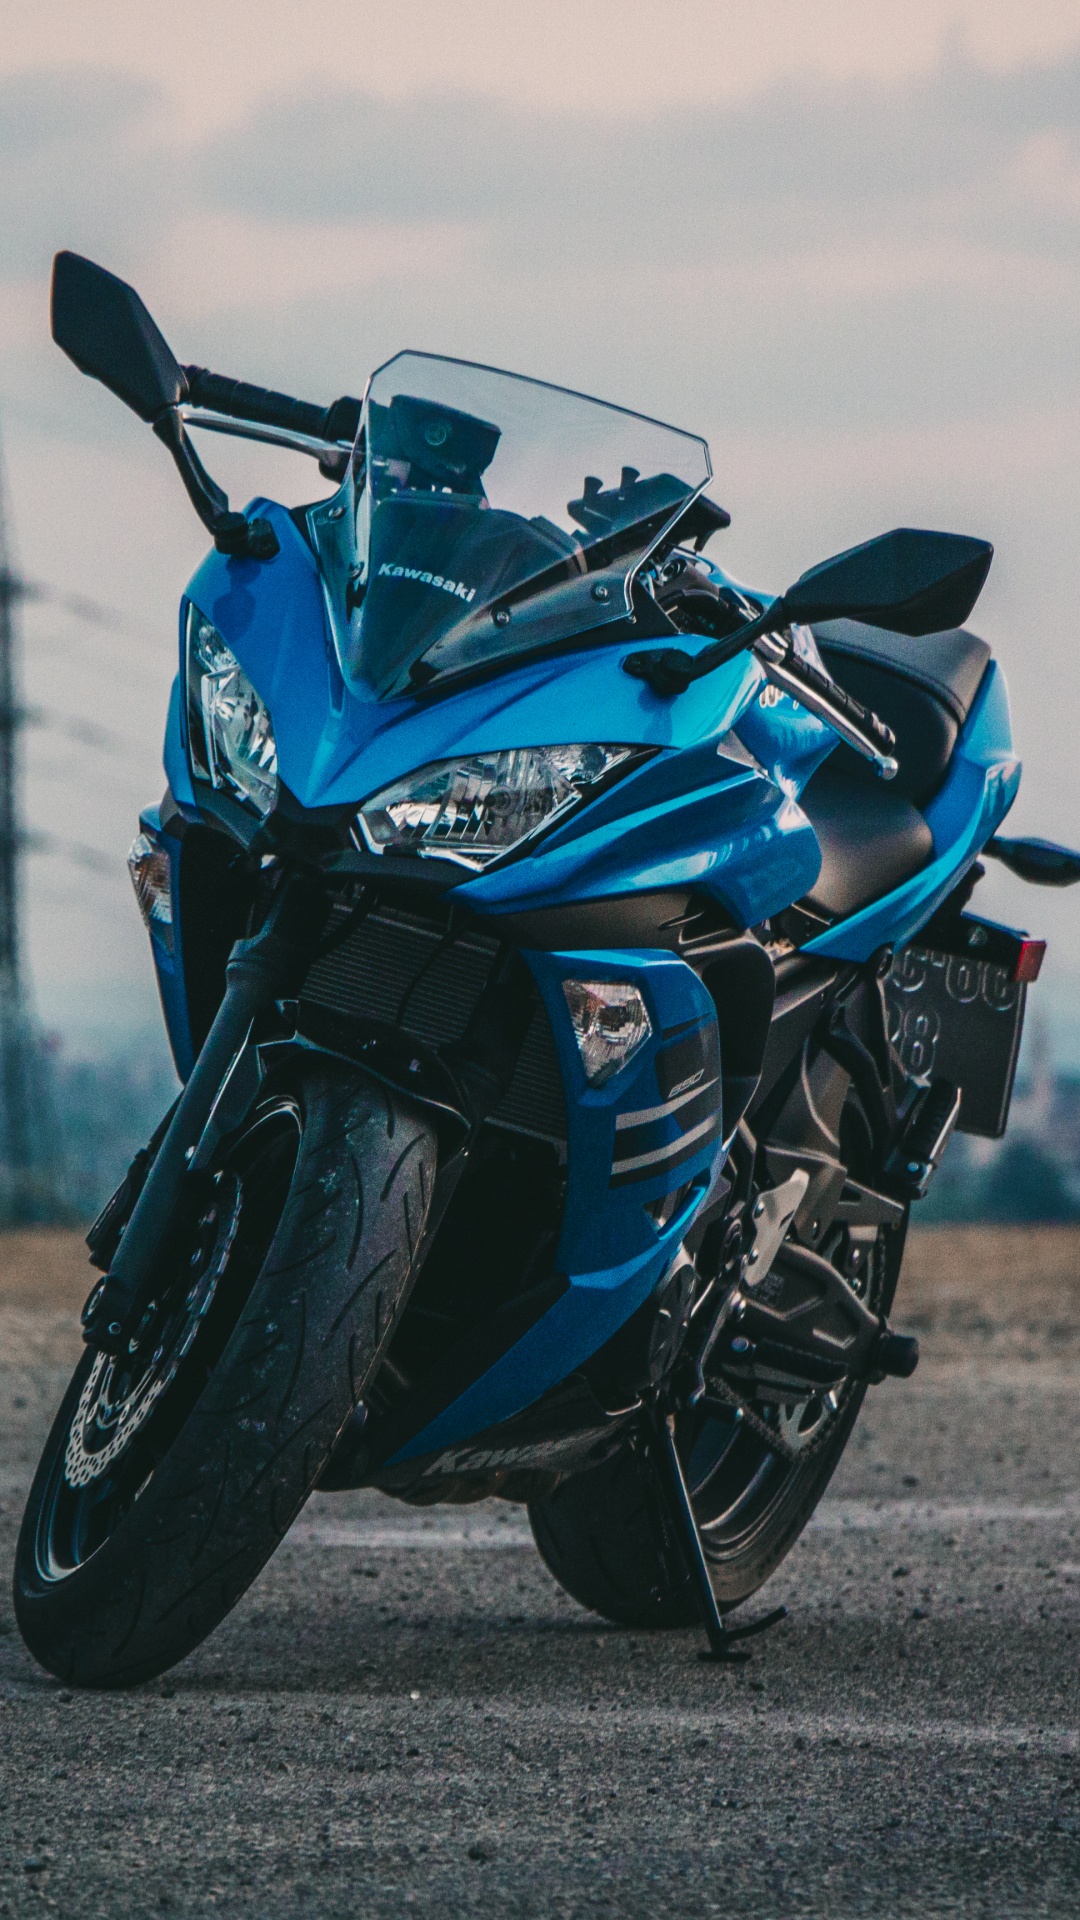 Blue and Black Sports Bike on Gray Asphalt Road During Daytime. Wallpaper in 1080x1920 Resolution